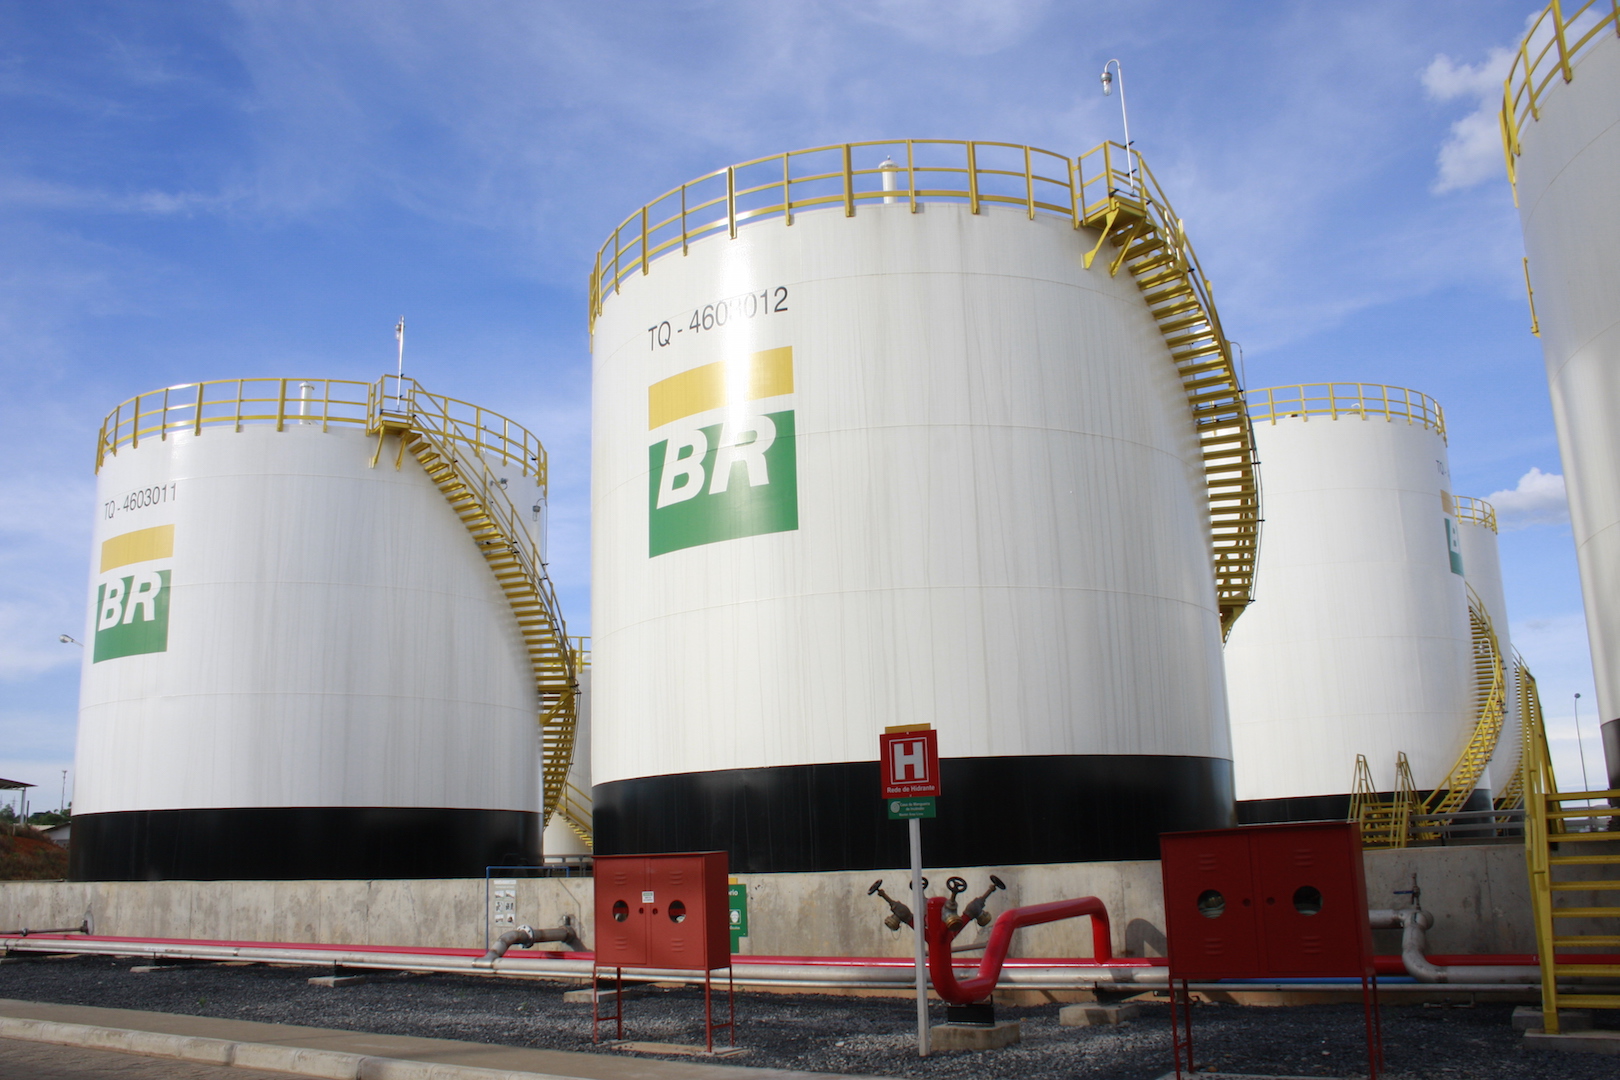 Petrobras divestment plan opens door for other players: analysts